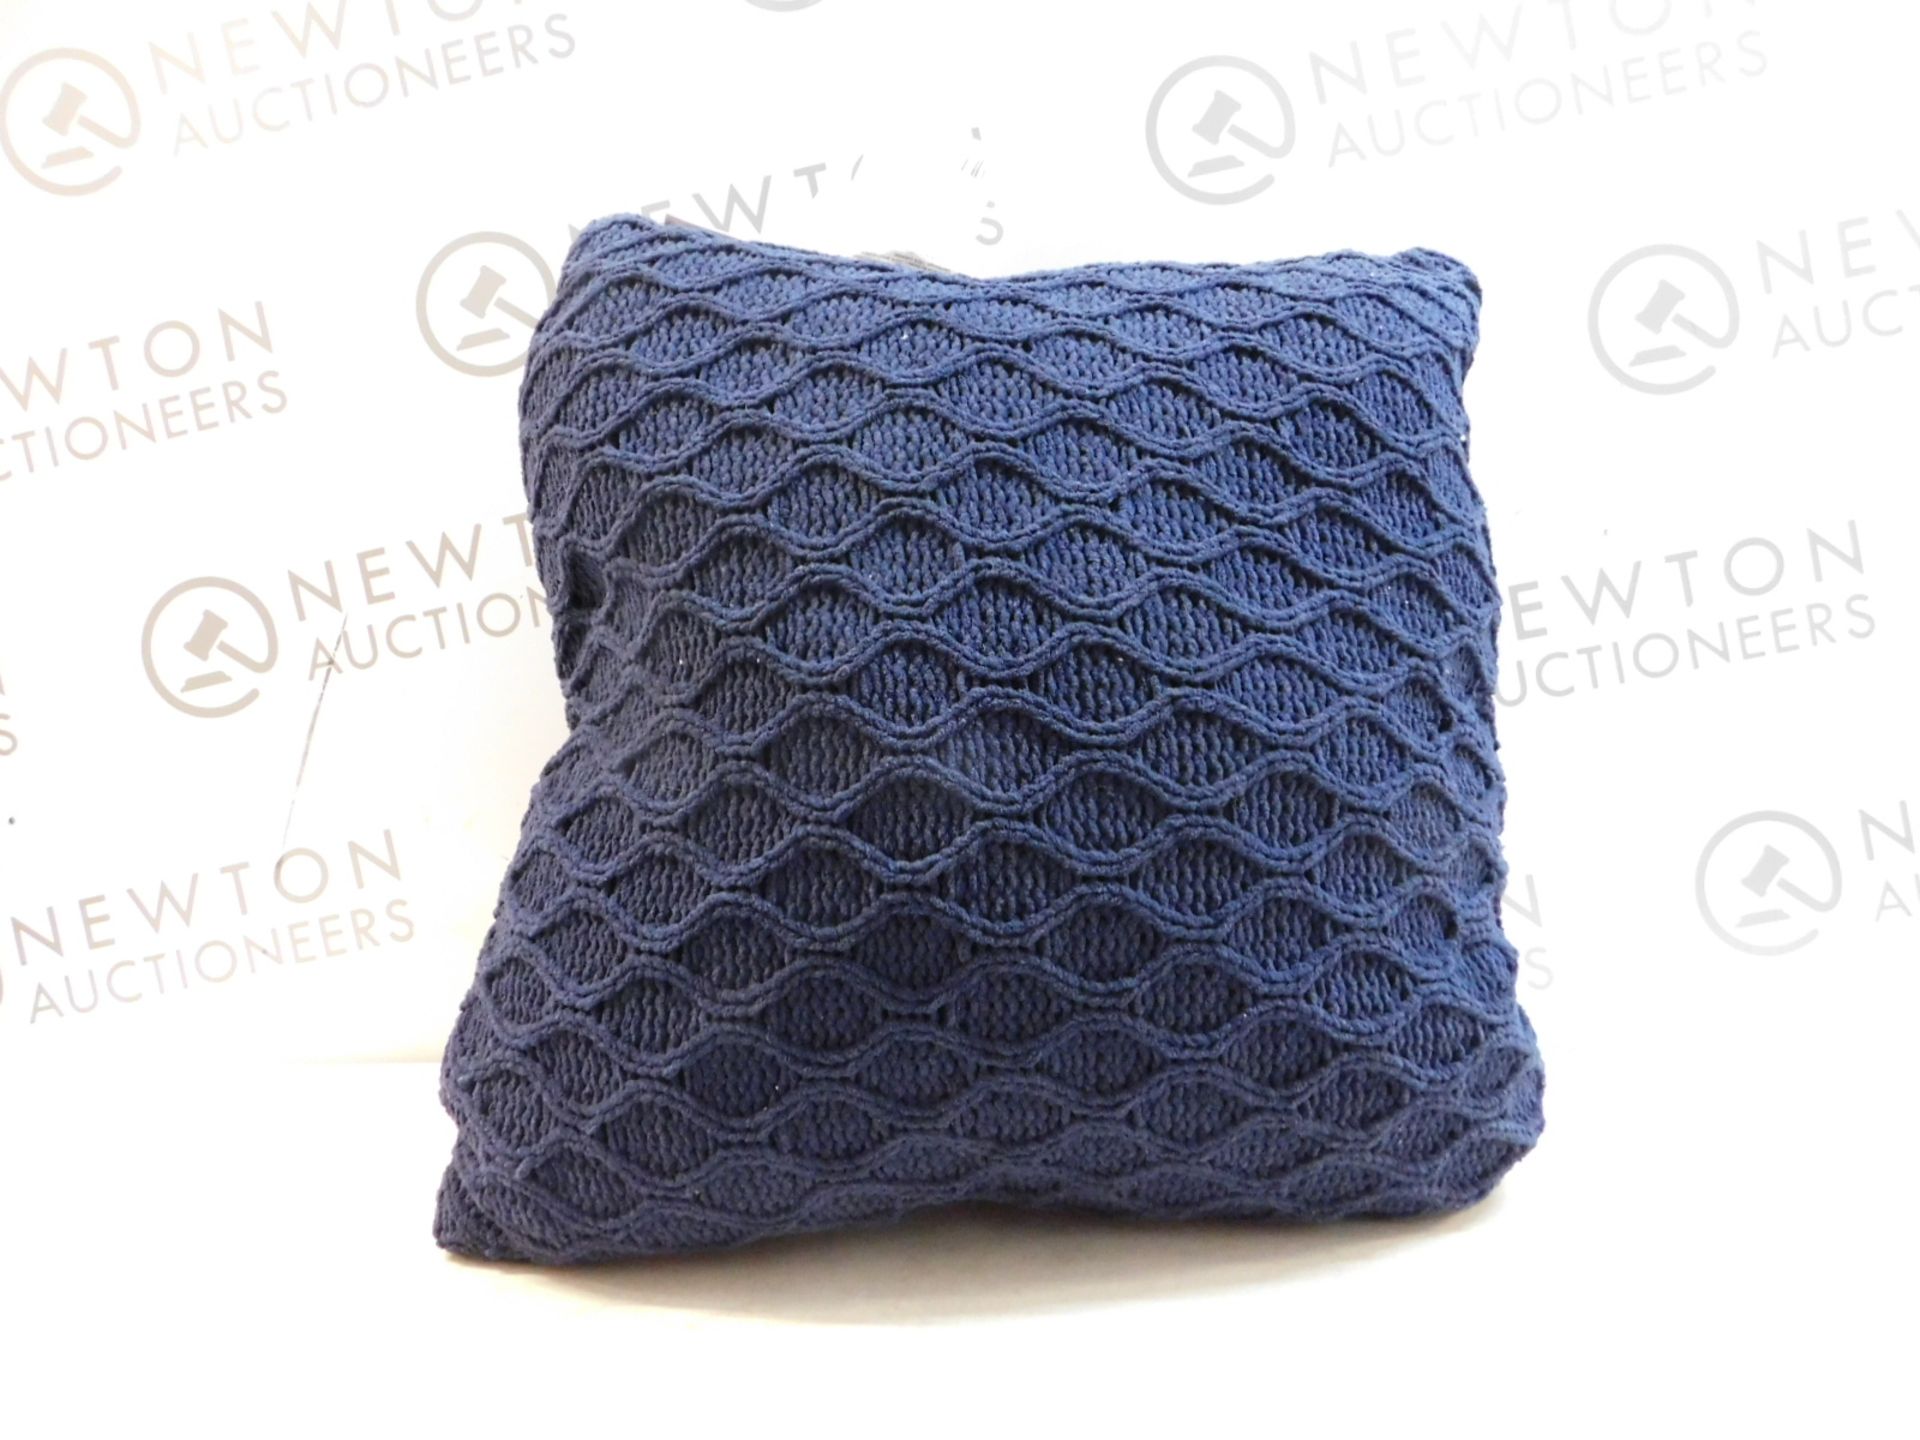 1 MON CHATEAU NAVY KNITTED SOFT CUSHION RRP Â£19.99